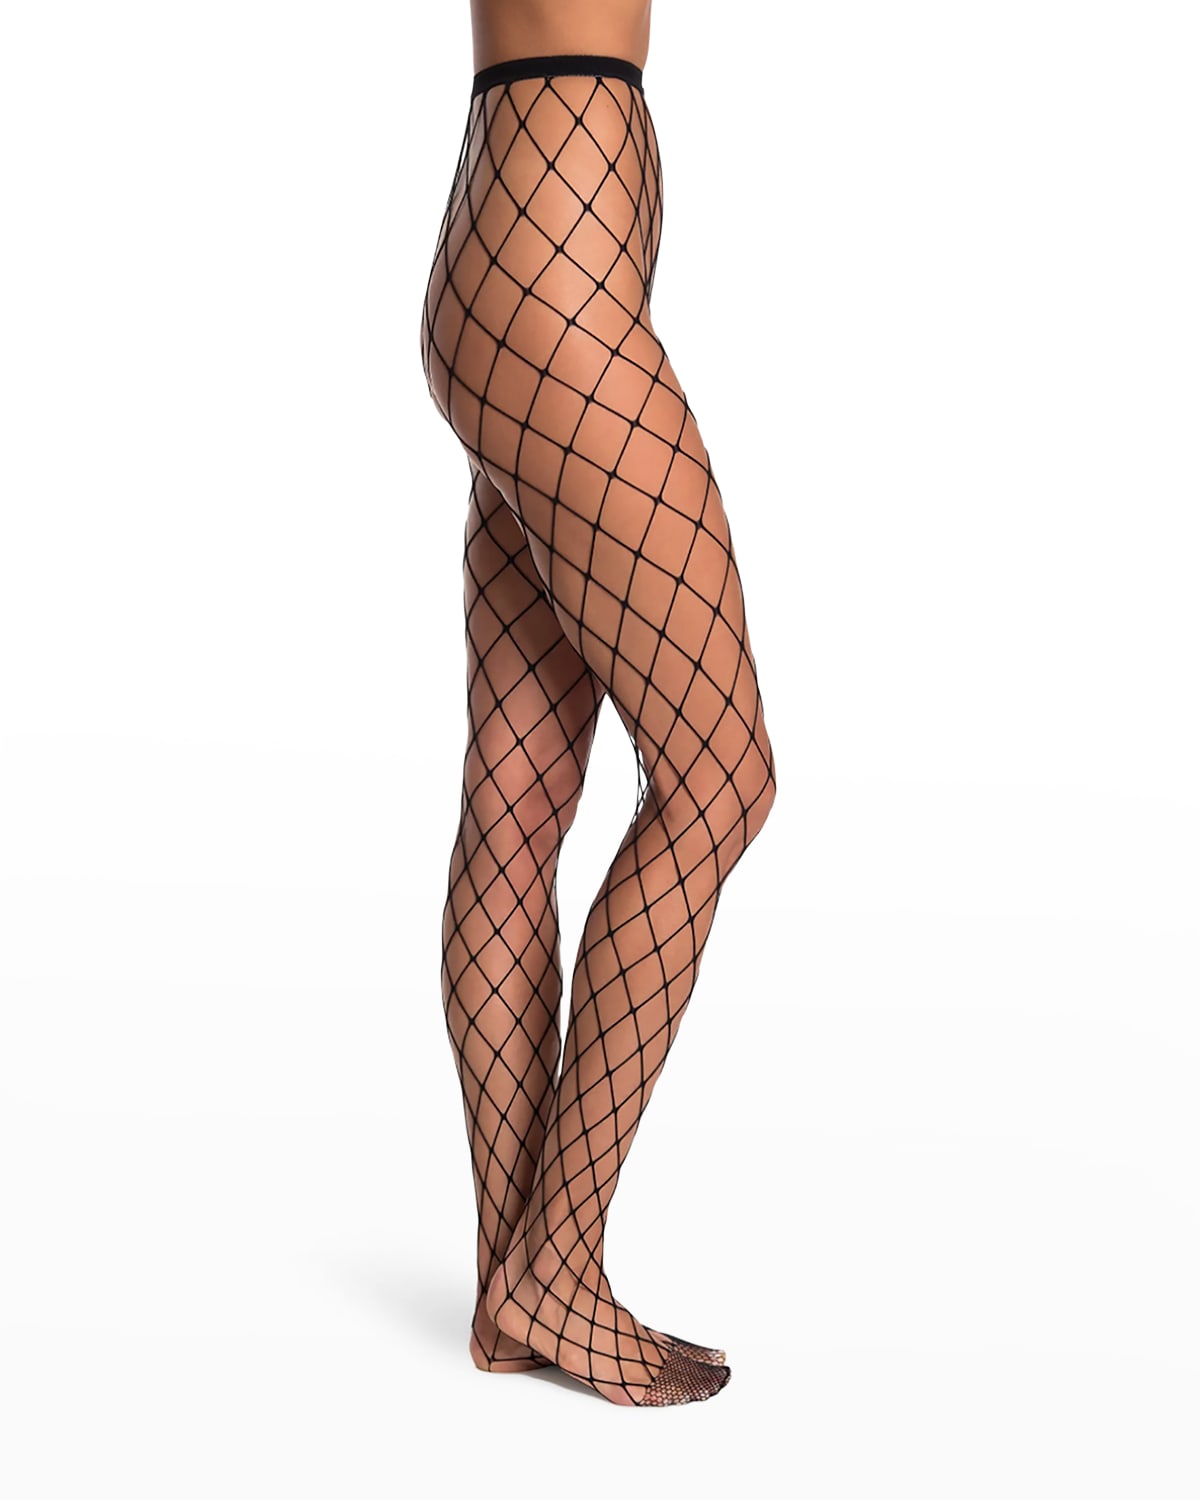 Caught Up Large Fishnet Tights